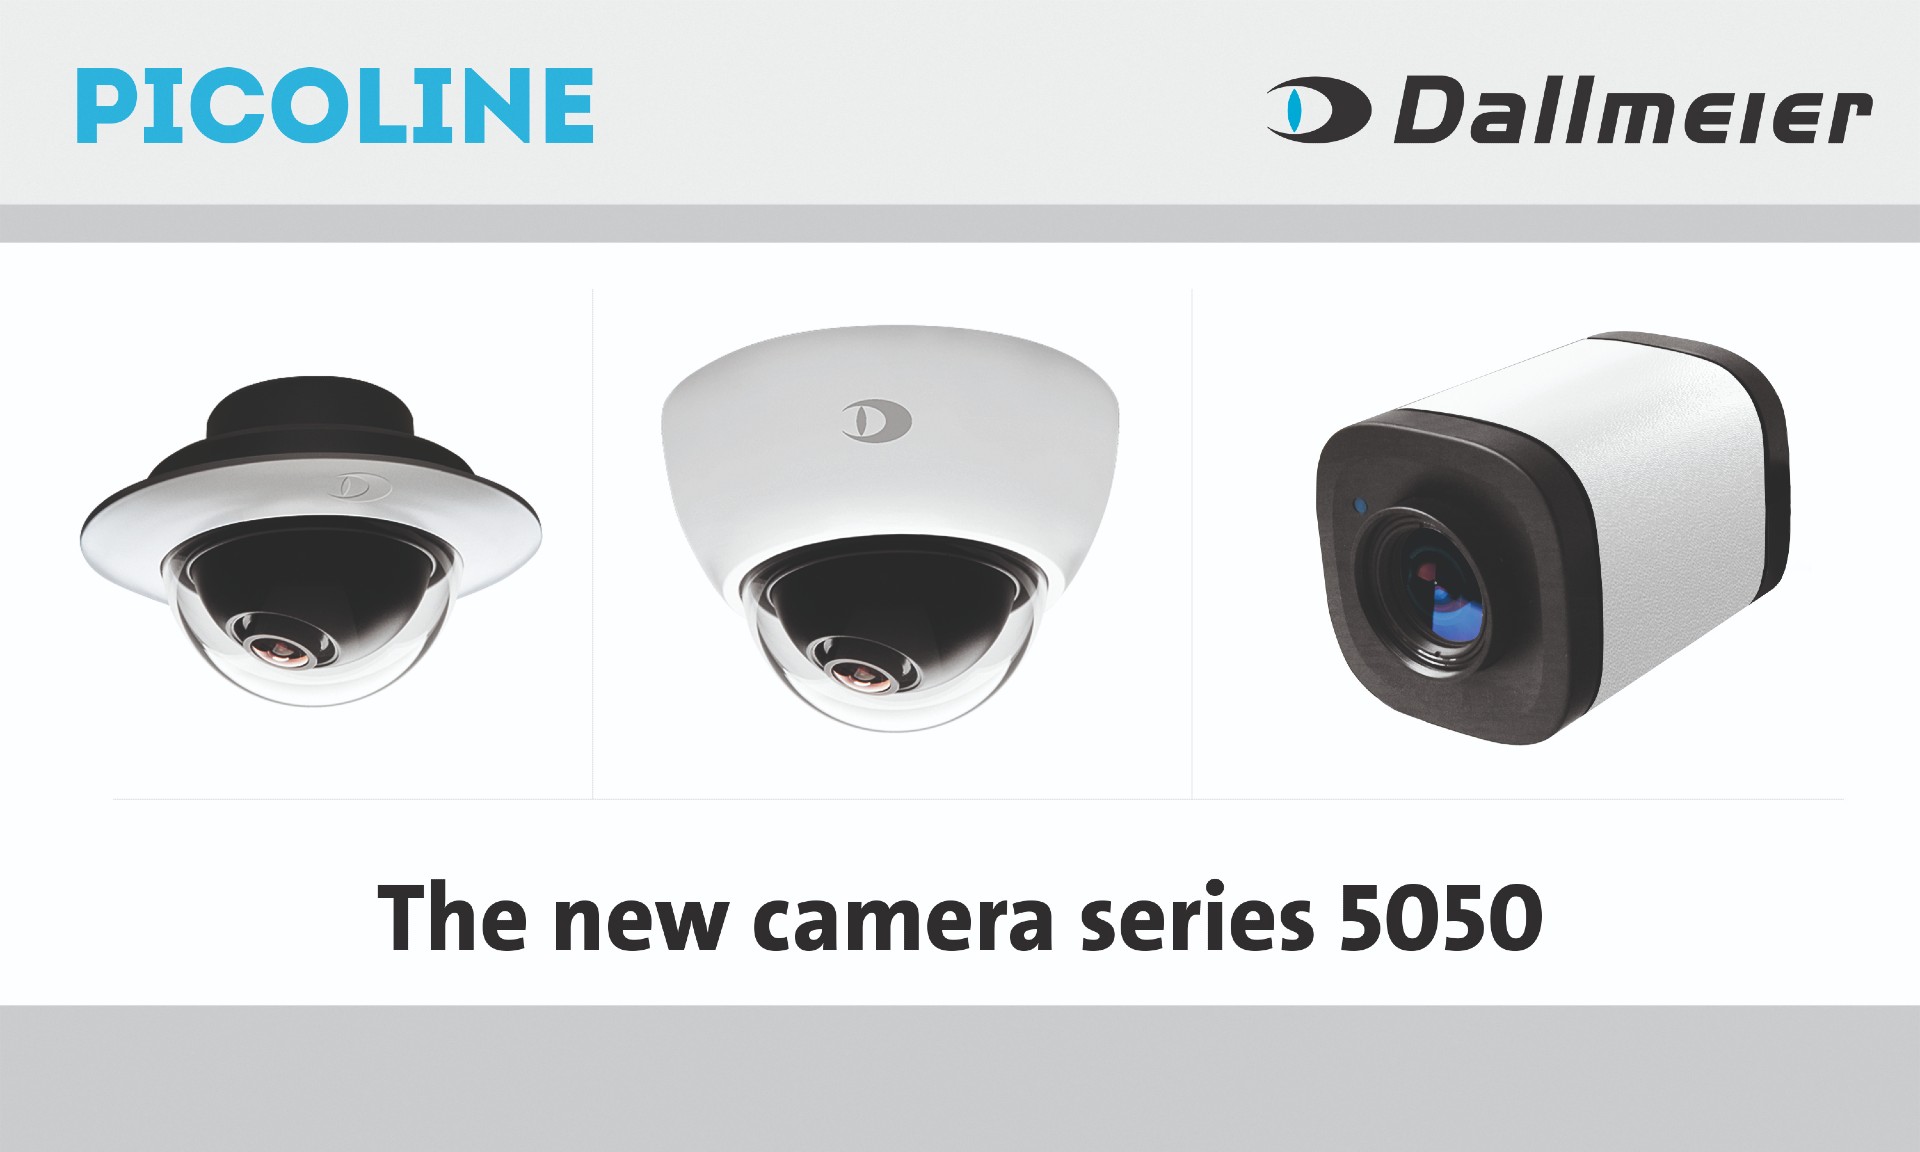 Dallmeier introduces new generation of “Picoline” ultracompact fixed dome and varifocal box cameras